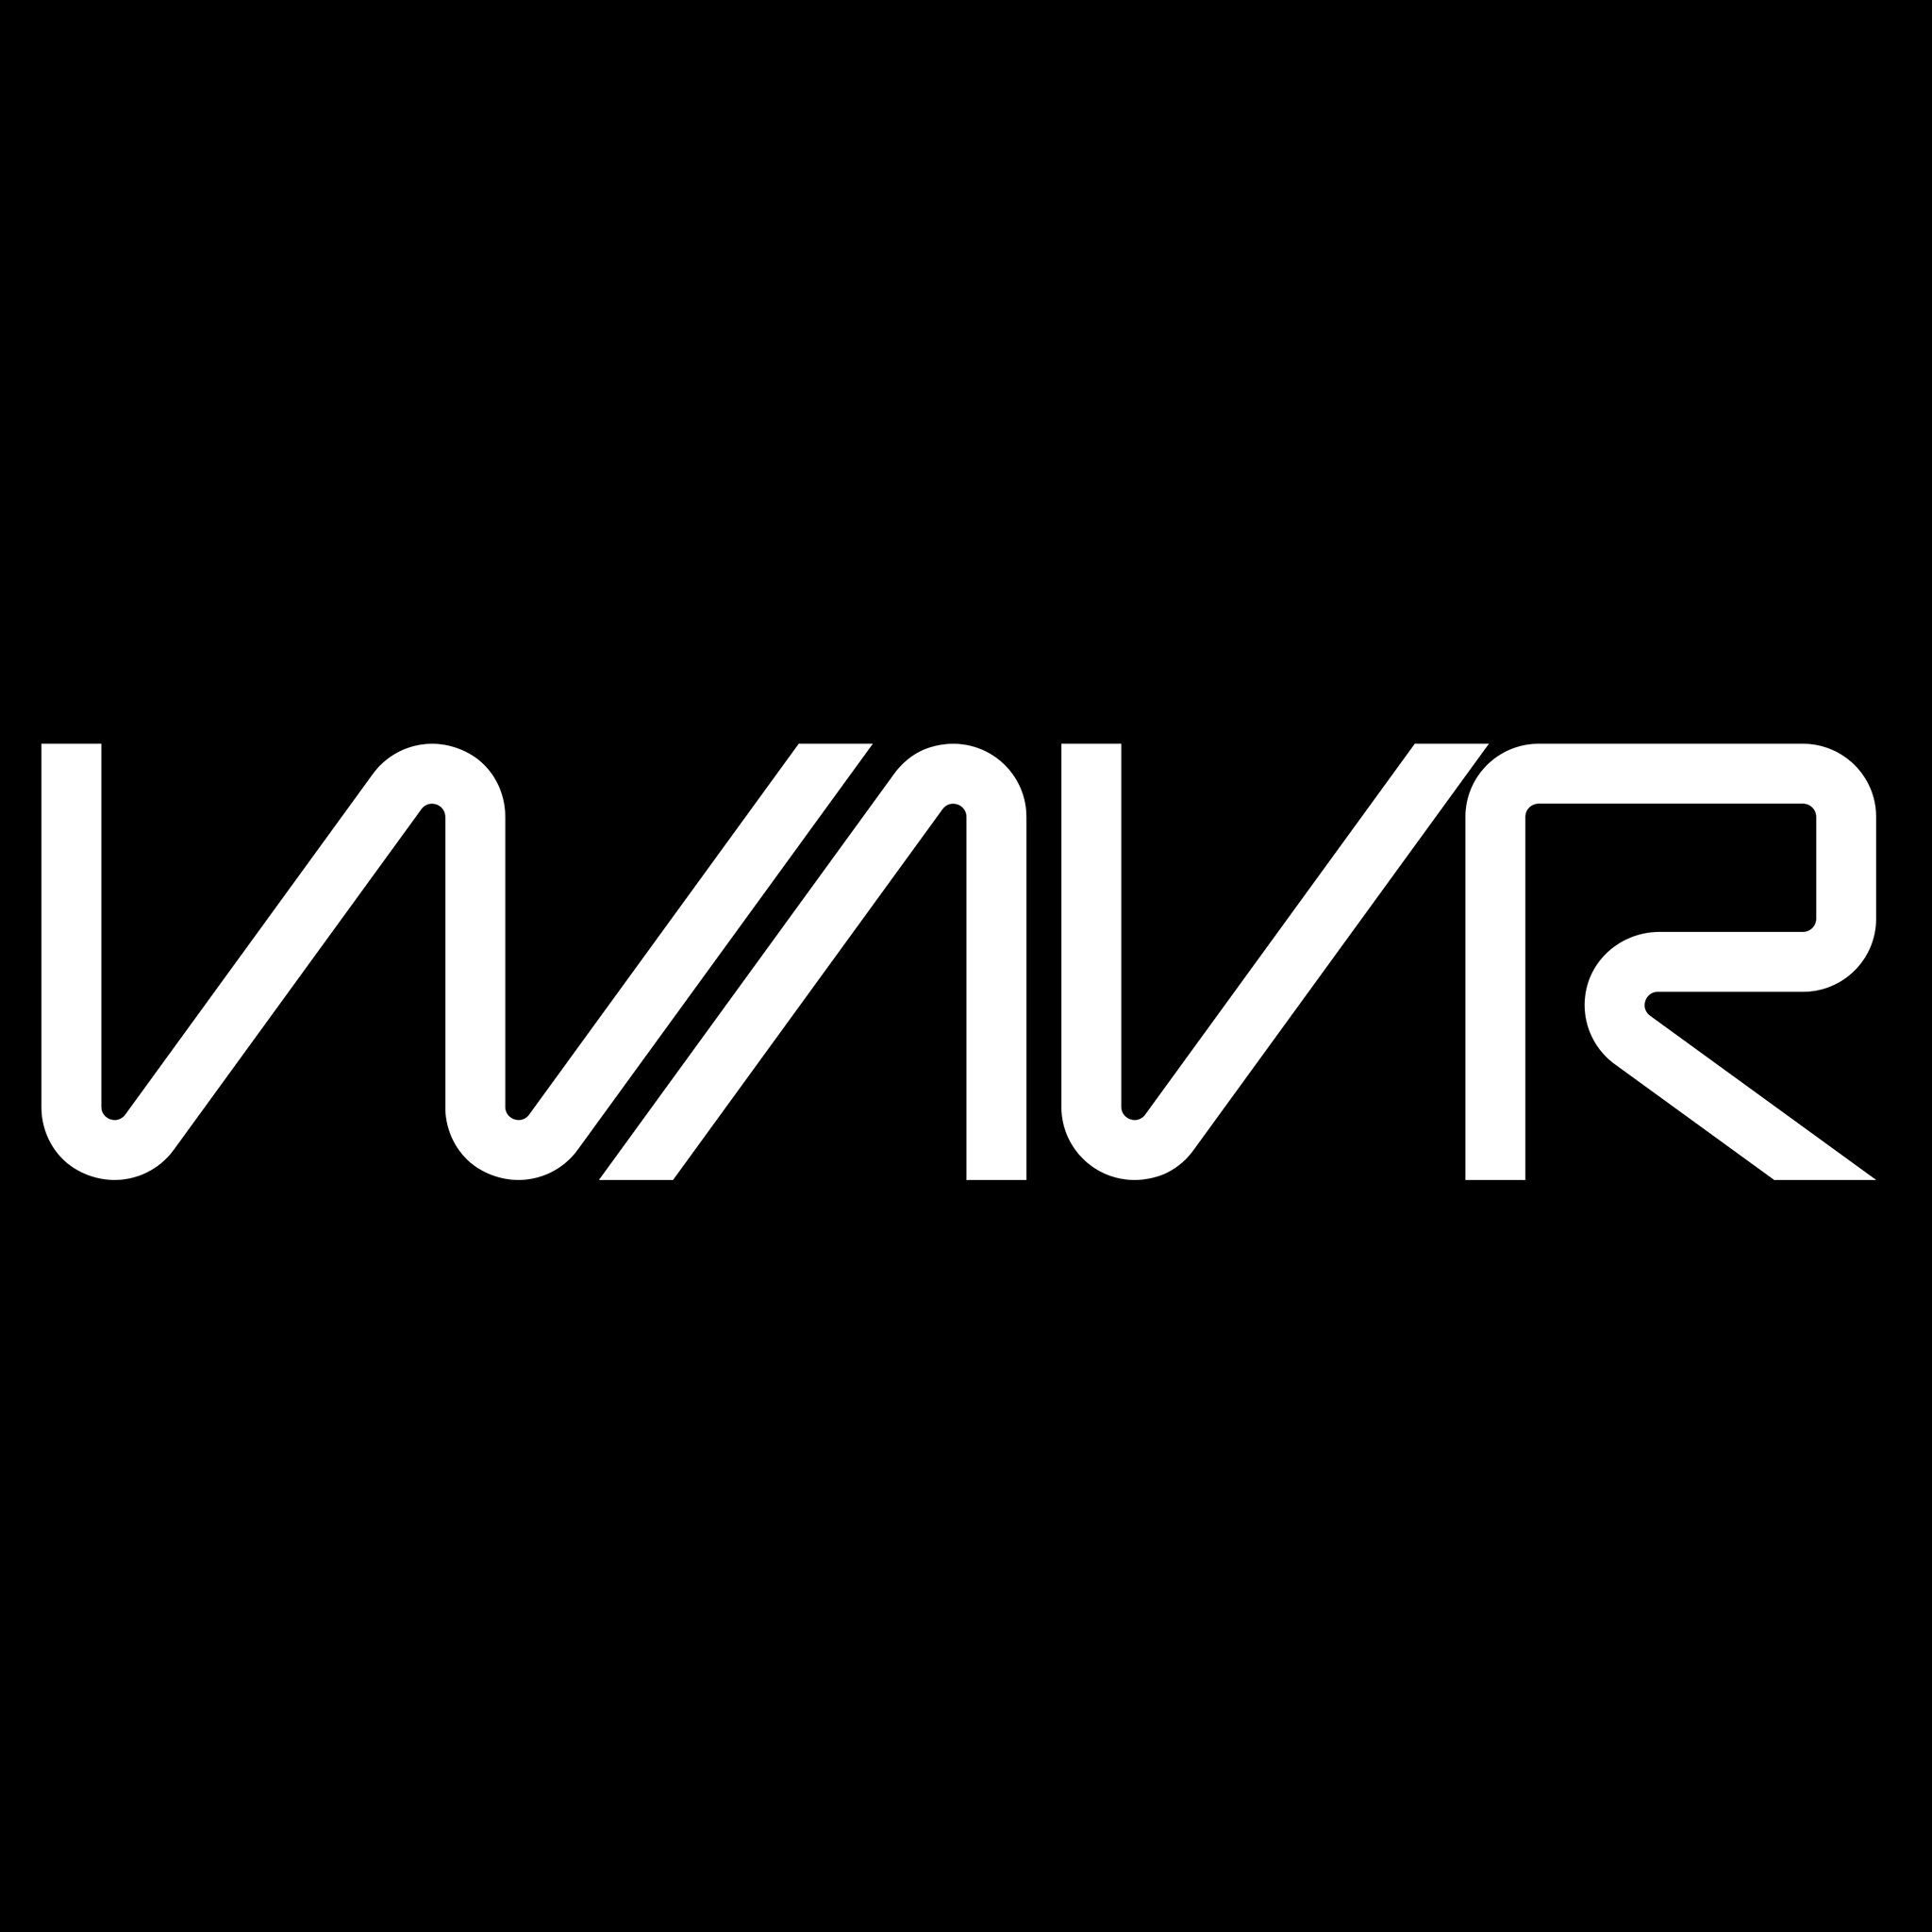 Wavr Tech AB is an innovation company. We specialize in detecting, analyzing and identifying Health and Safety risks to prevent injuries both short- and longter